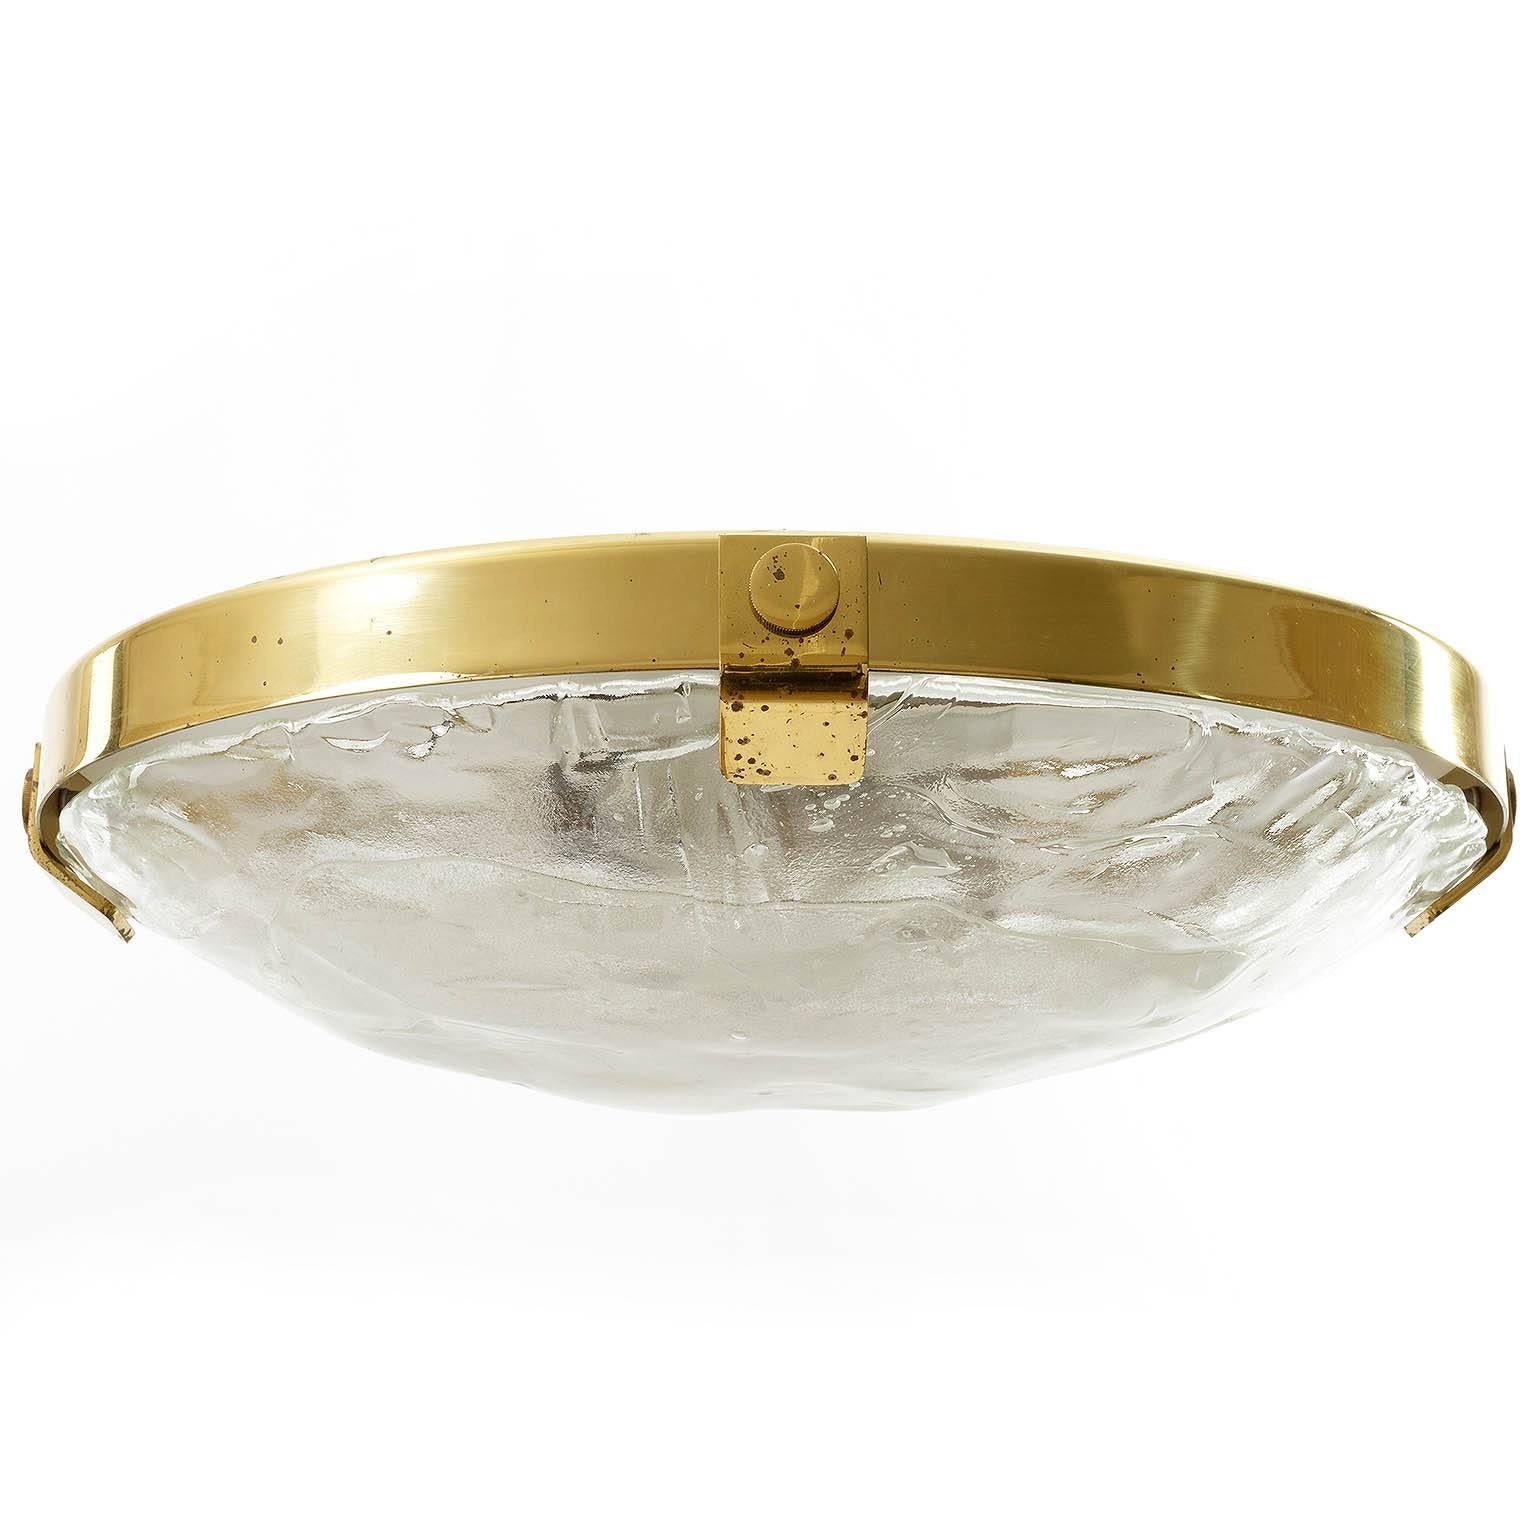 One of three brass and Murano glass flush mount light fixtures by Kalmar, manufactured in Mid-Century, circa 1970 (late 1960s or early 1970s).
It is made of a brass ring which holds a large hand blown glass with four brass brackets. The glass has a